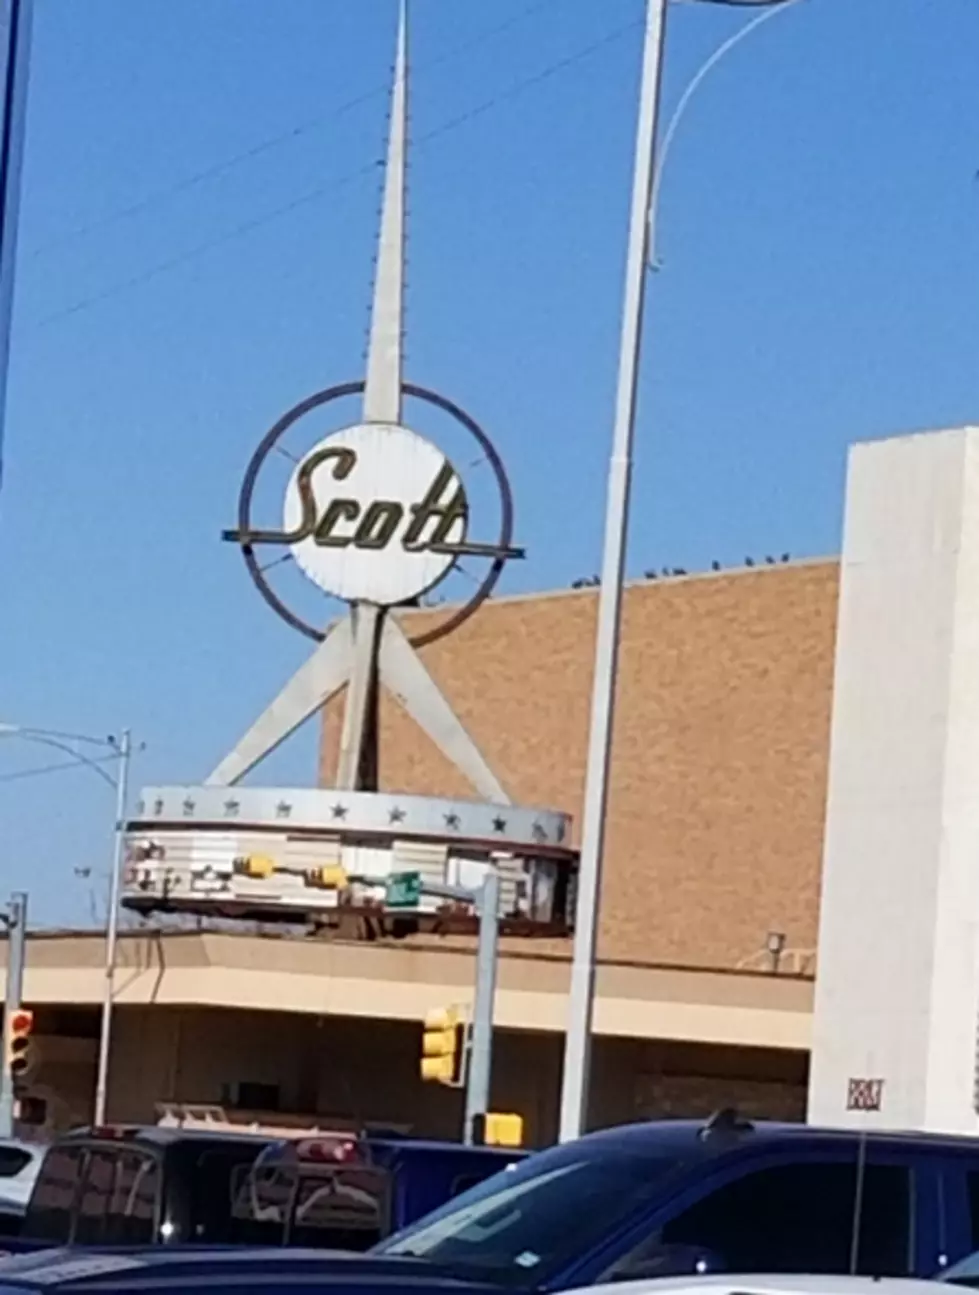 The Scott Sign Is Going Away Soon